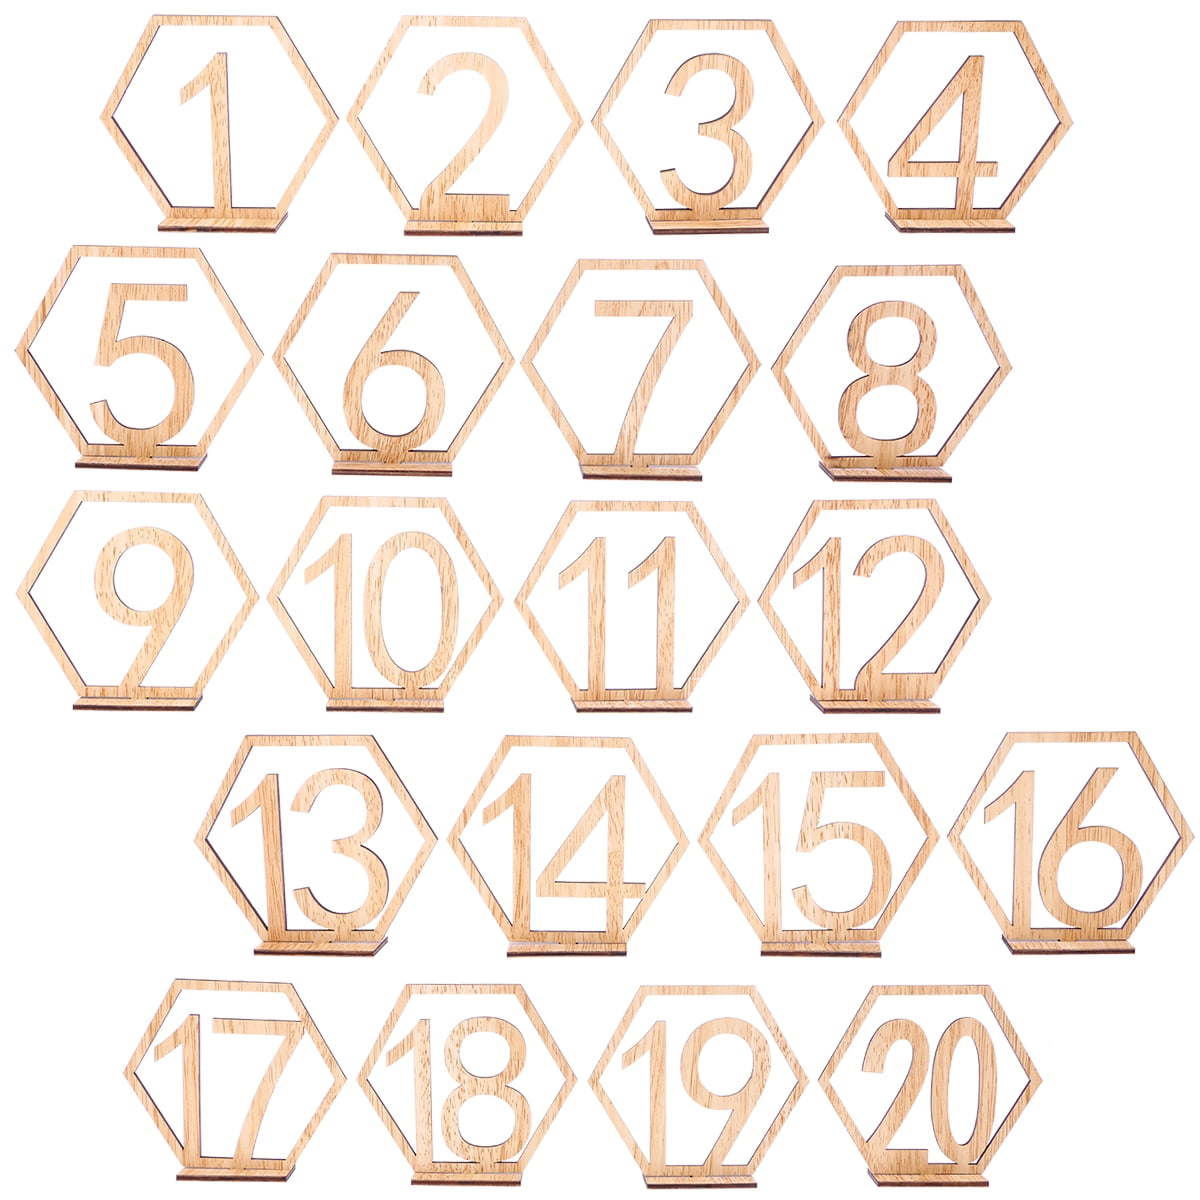 20pcs Hexagon 1-20 Wooden Table Numbers with Holder Base Wedding Table Decor as 